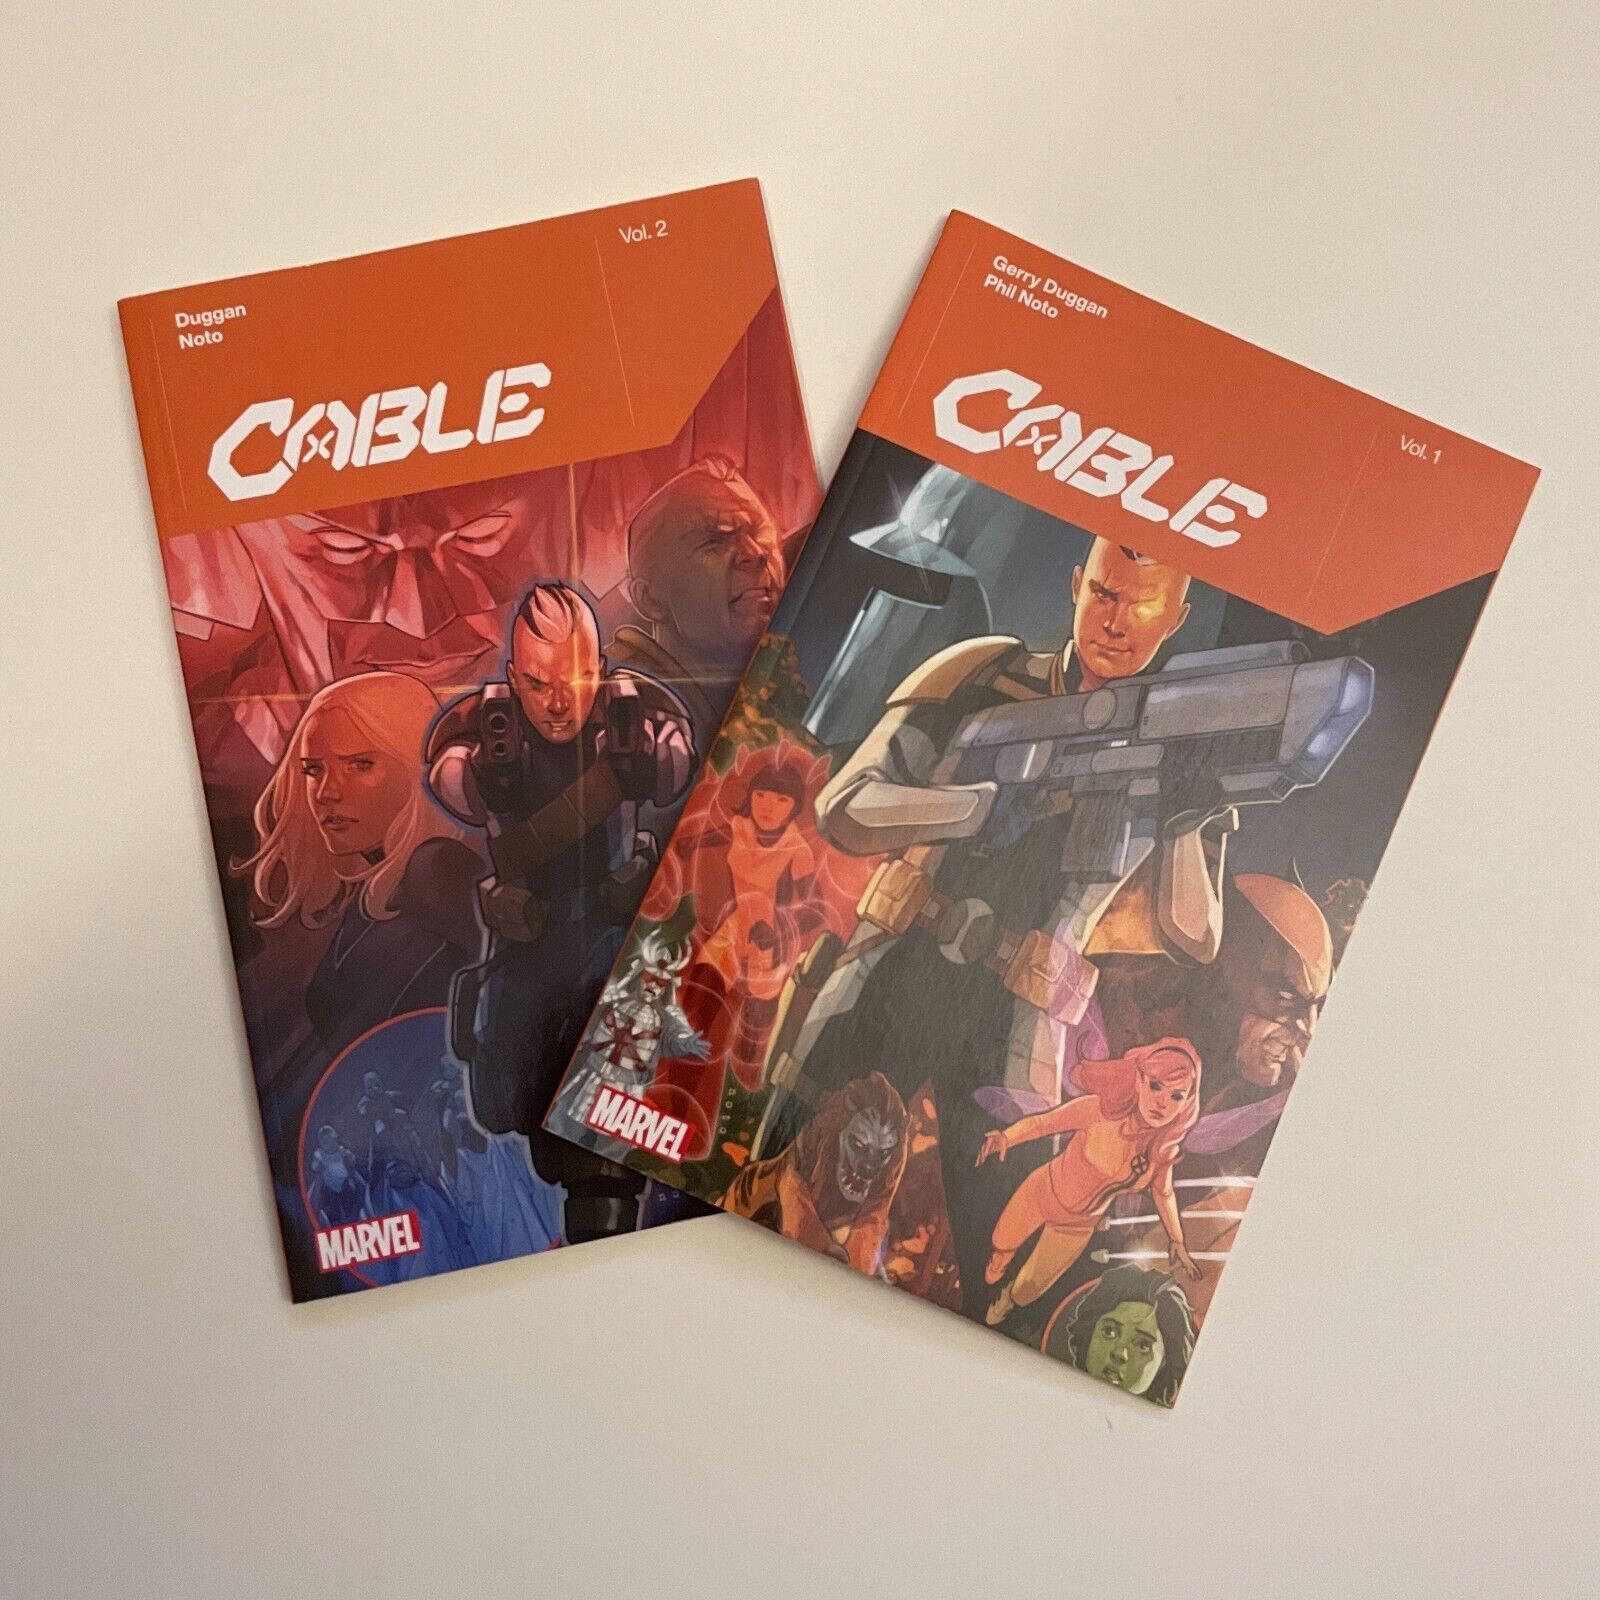 Cable Vol. 1,2 by Gerry Duggan (Marvel,2020) TPB/Paperback